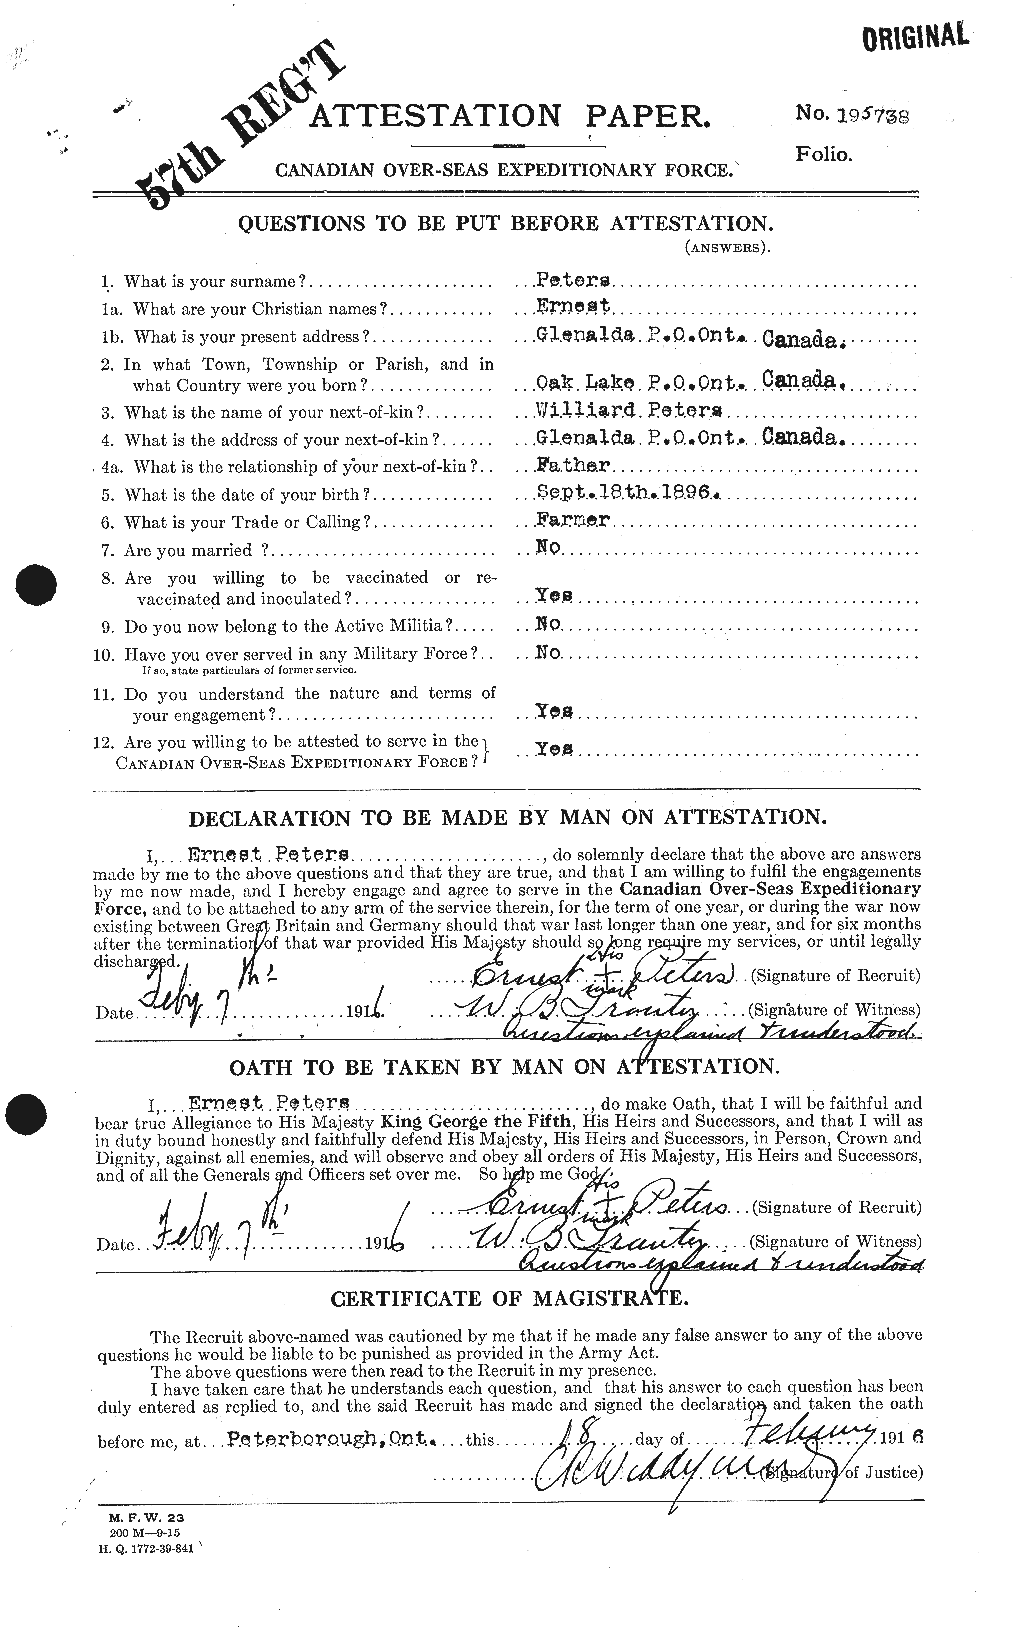 Personnel Records of the First World War - CEF 575414a